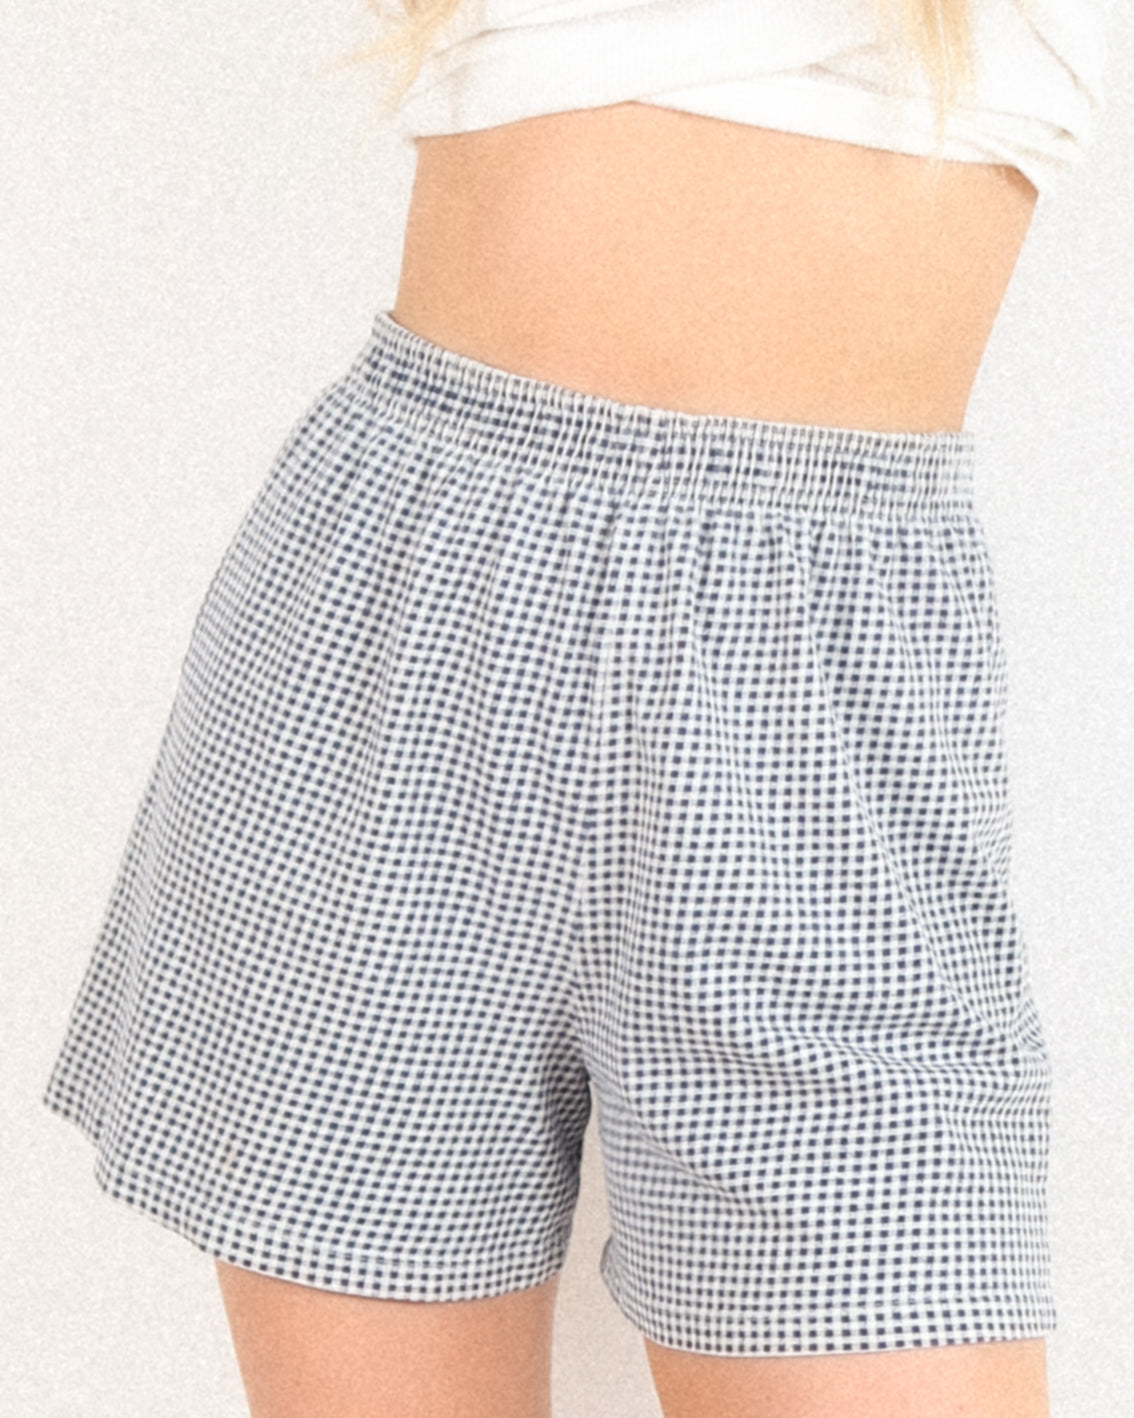 80's Checkered Boxer Style Shorts